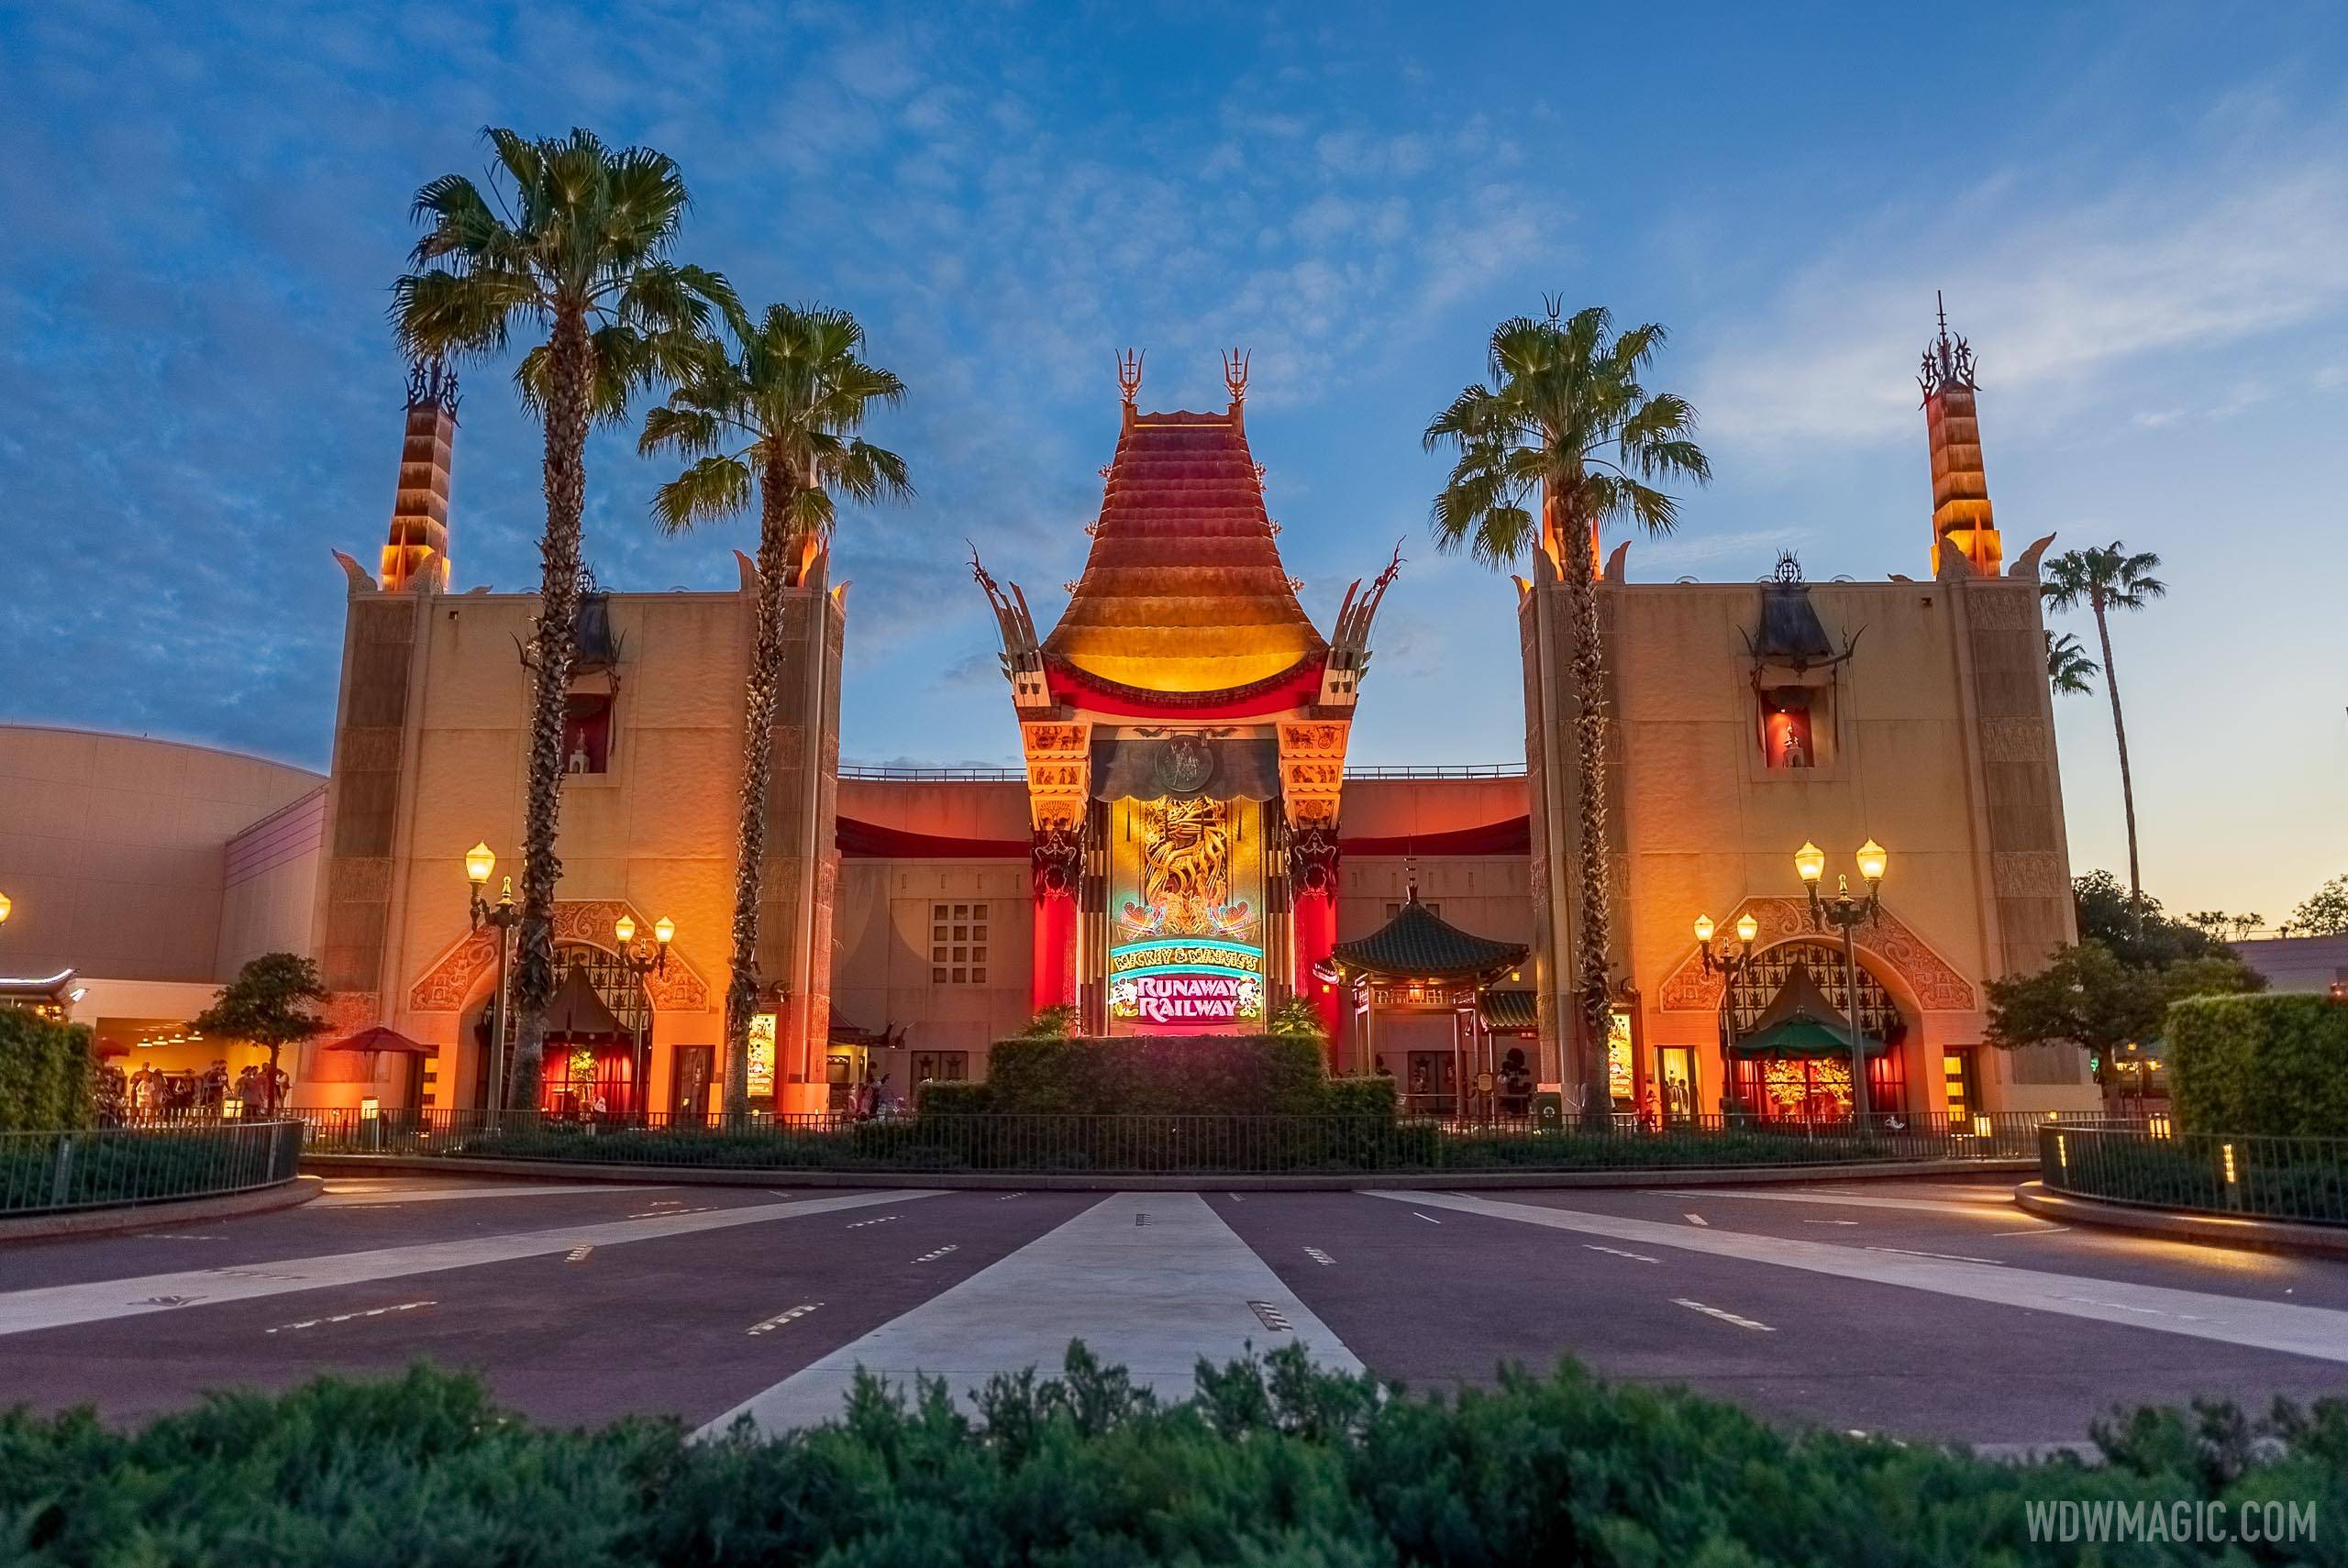 Disney's Hollywood Studios to mark its 30th year with new logo